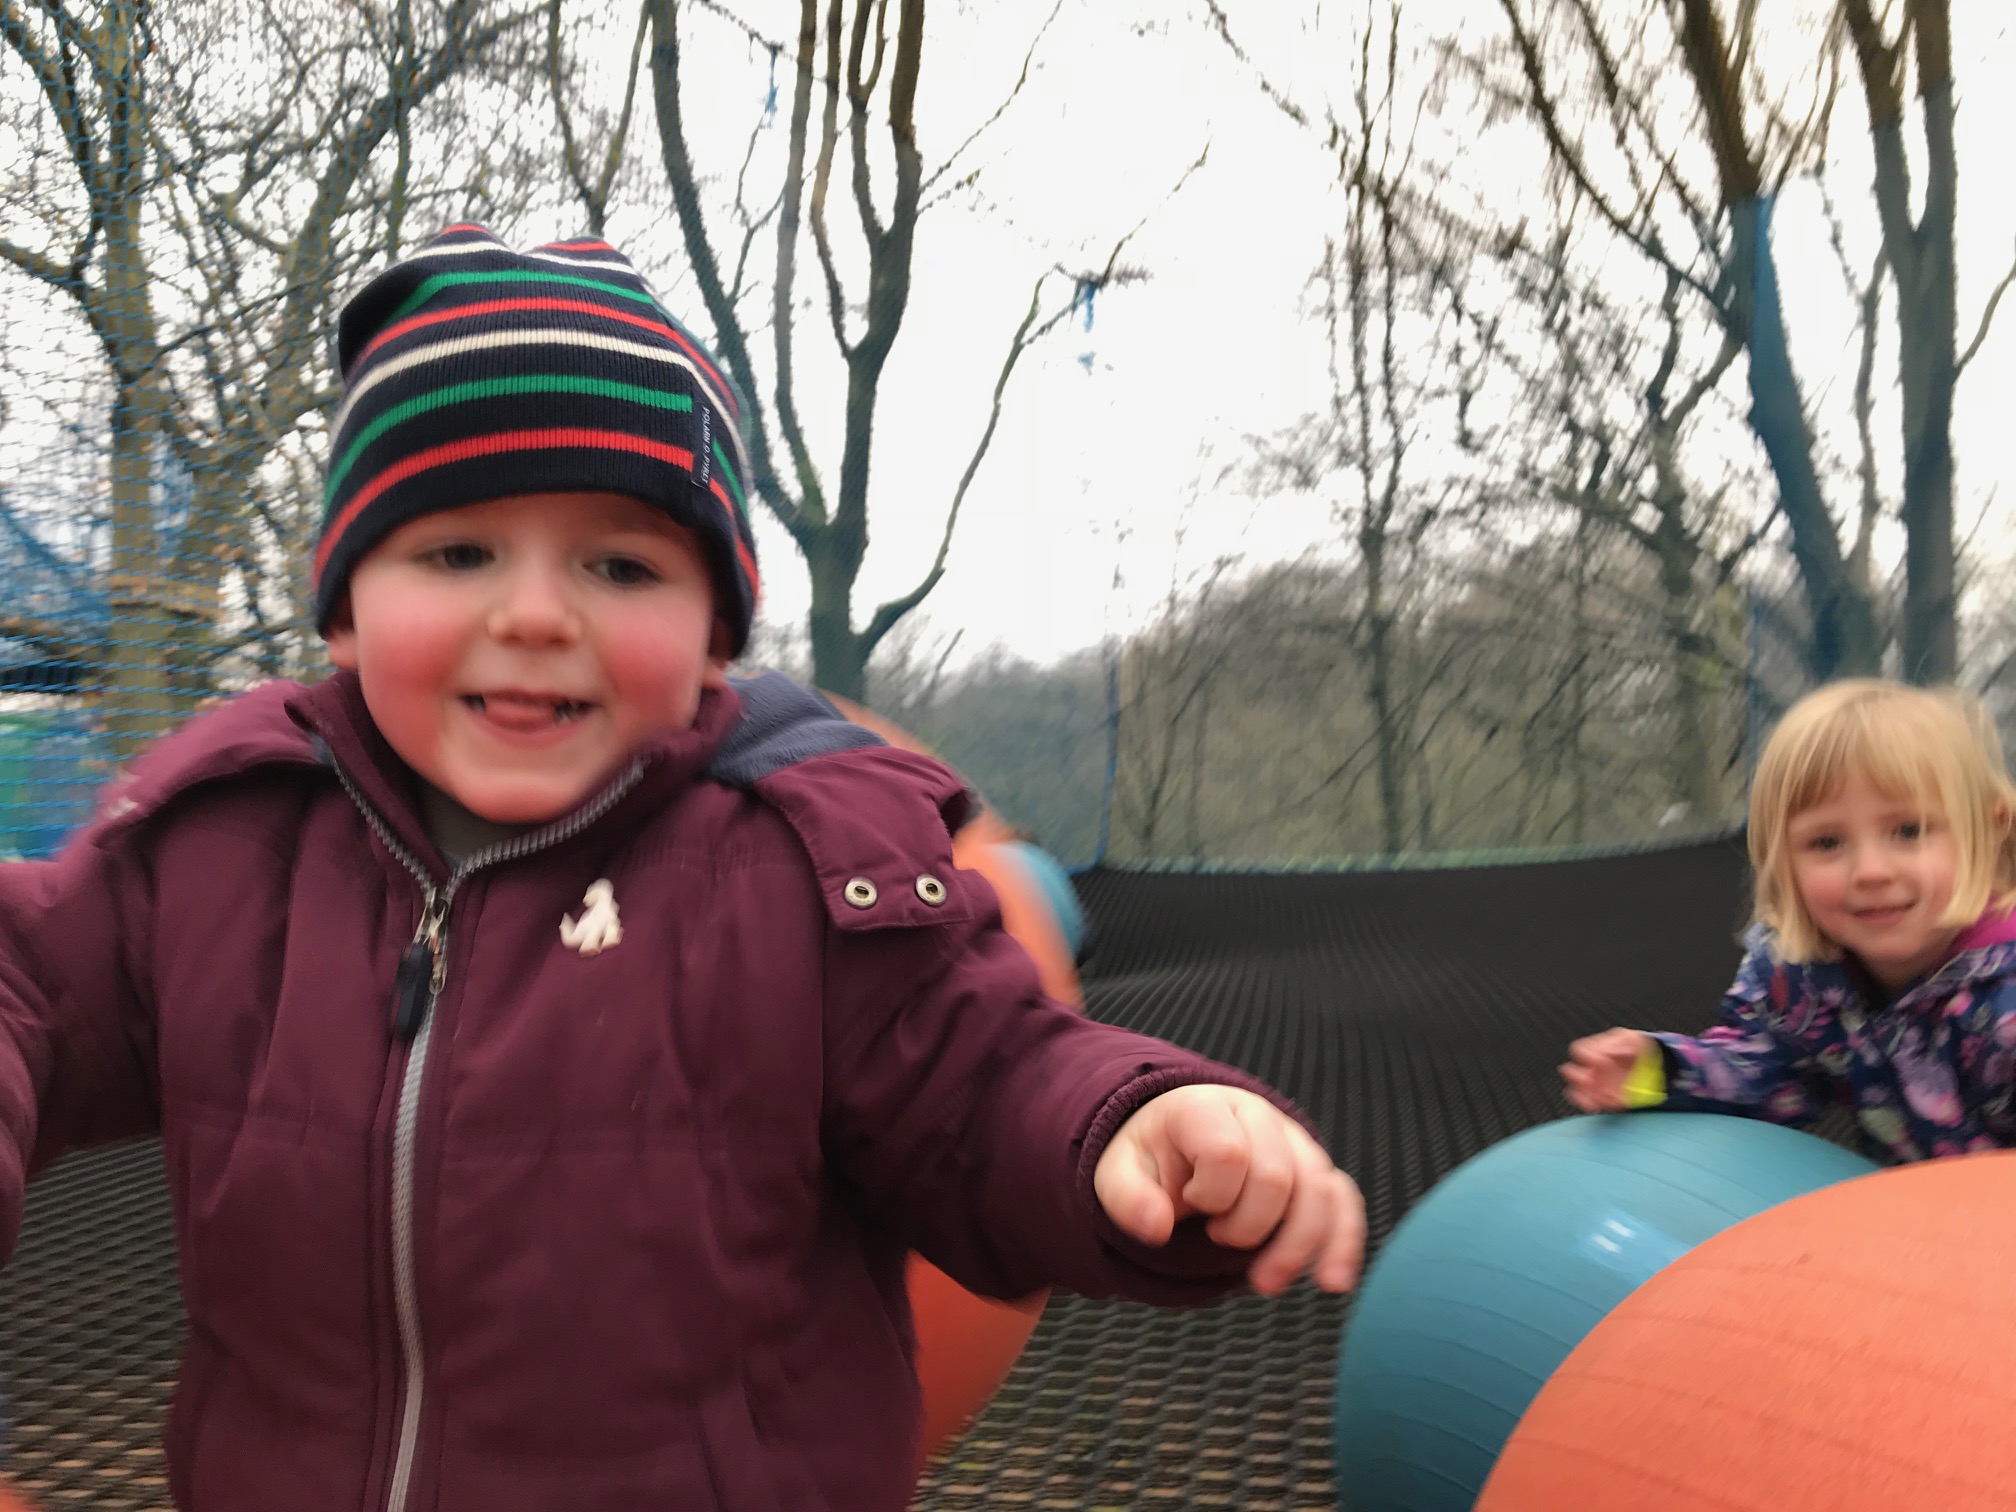 Family fun: Treetop Nets Manchester in Heaton Park